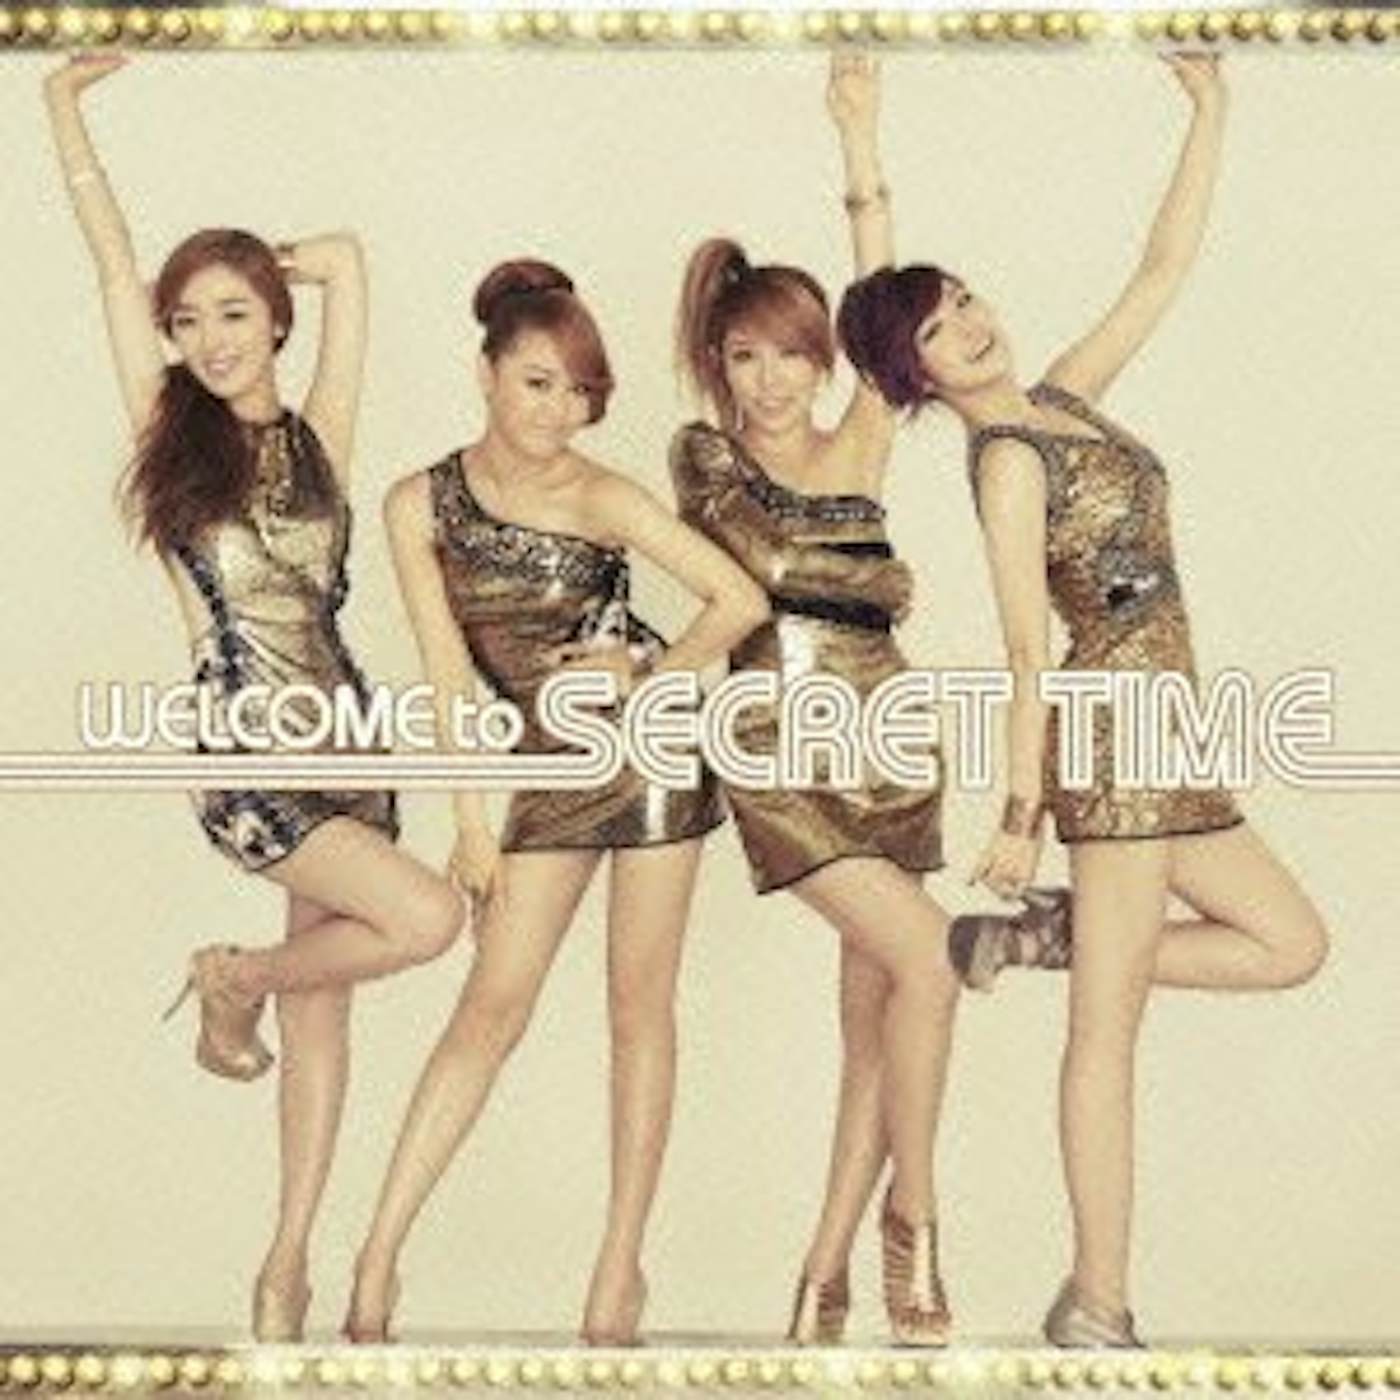 WELCOME TO SECRET TIME CD